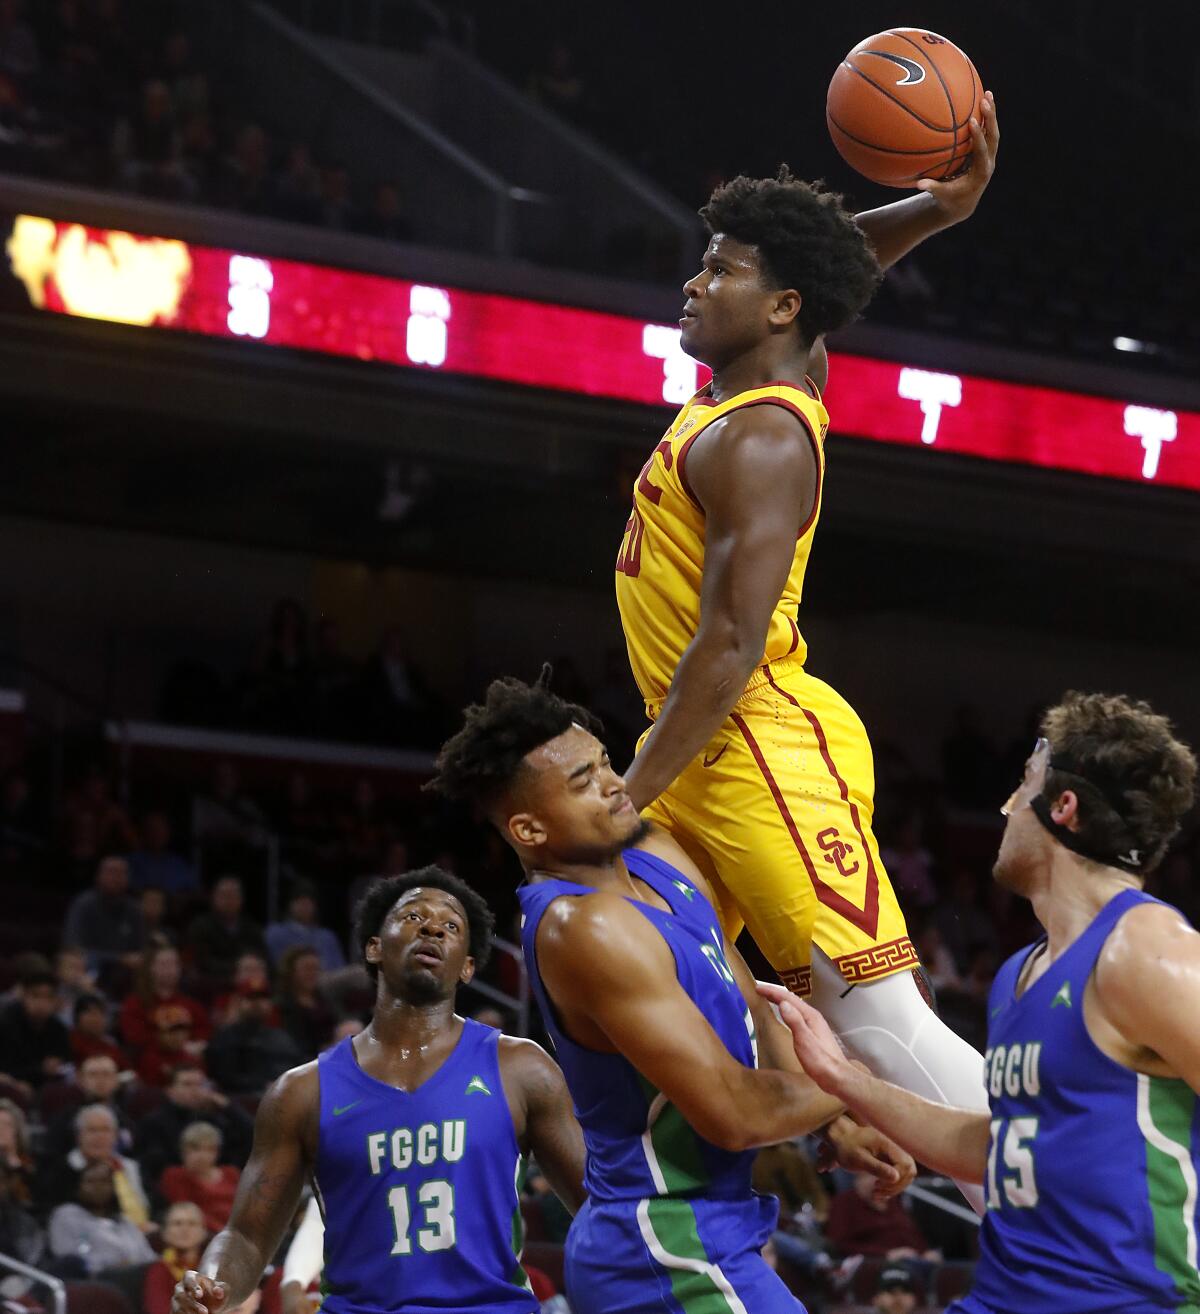 USC guard Ethan Anderson goes hard to the basket against FGCU in the second half Sunday on Dec. 29, 2019 at Galen Center.